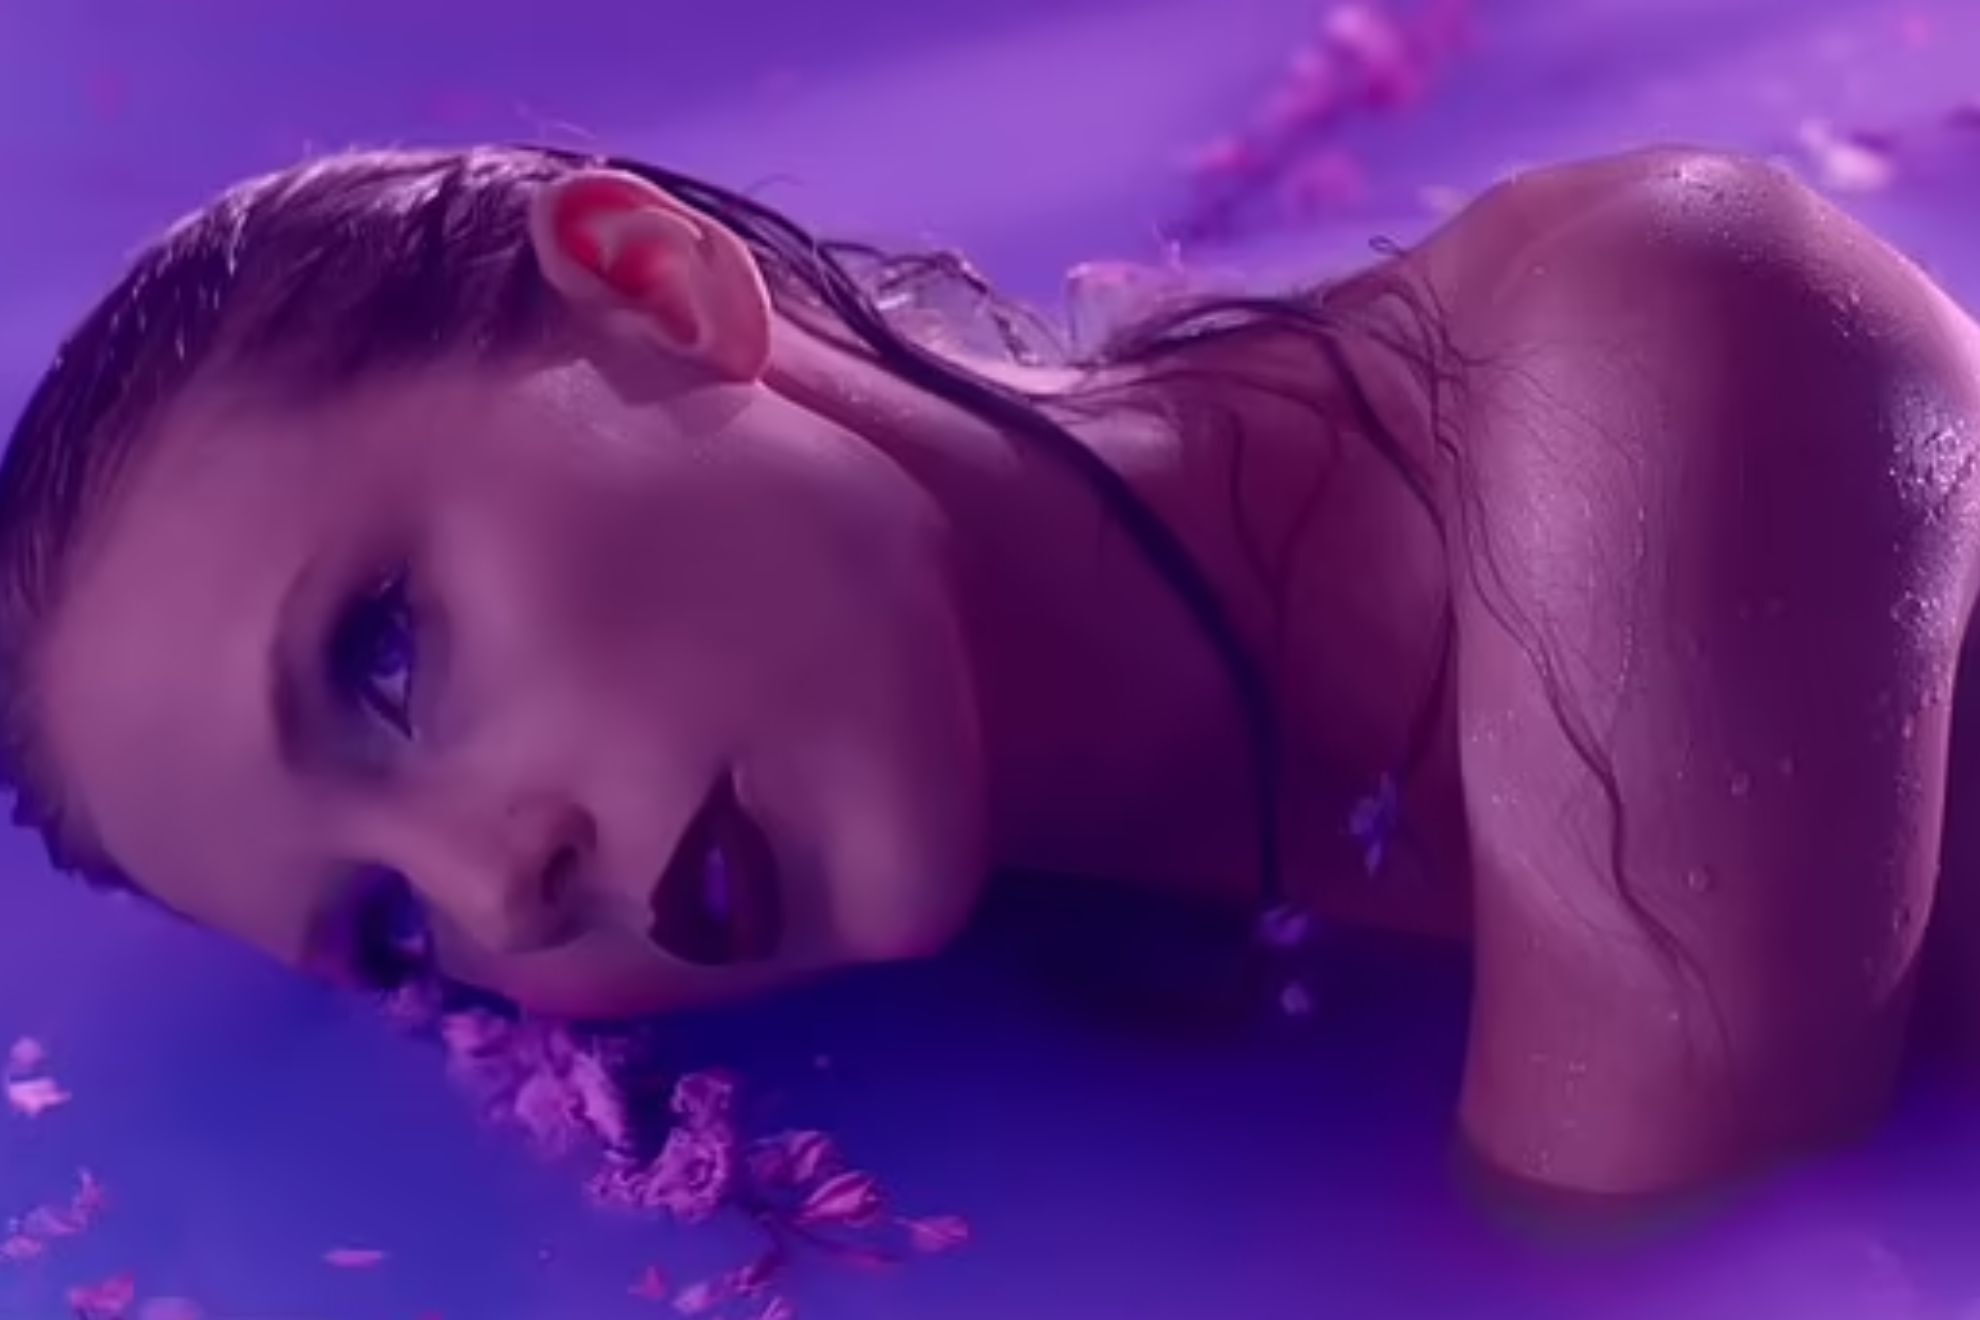 Taylor Swift's explosive music video in which she bathes naked with trans model Laith Ashley